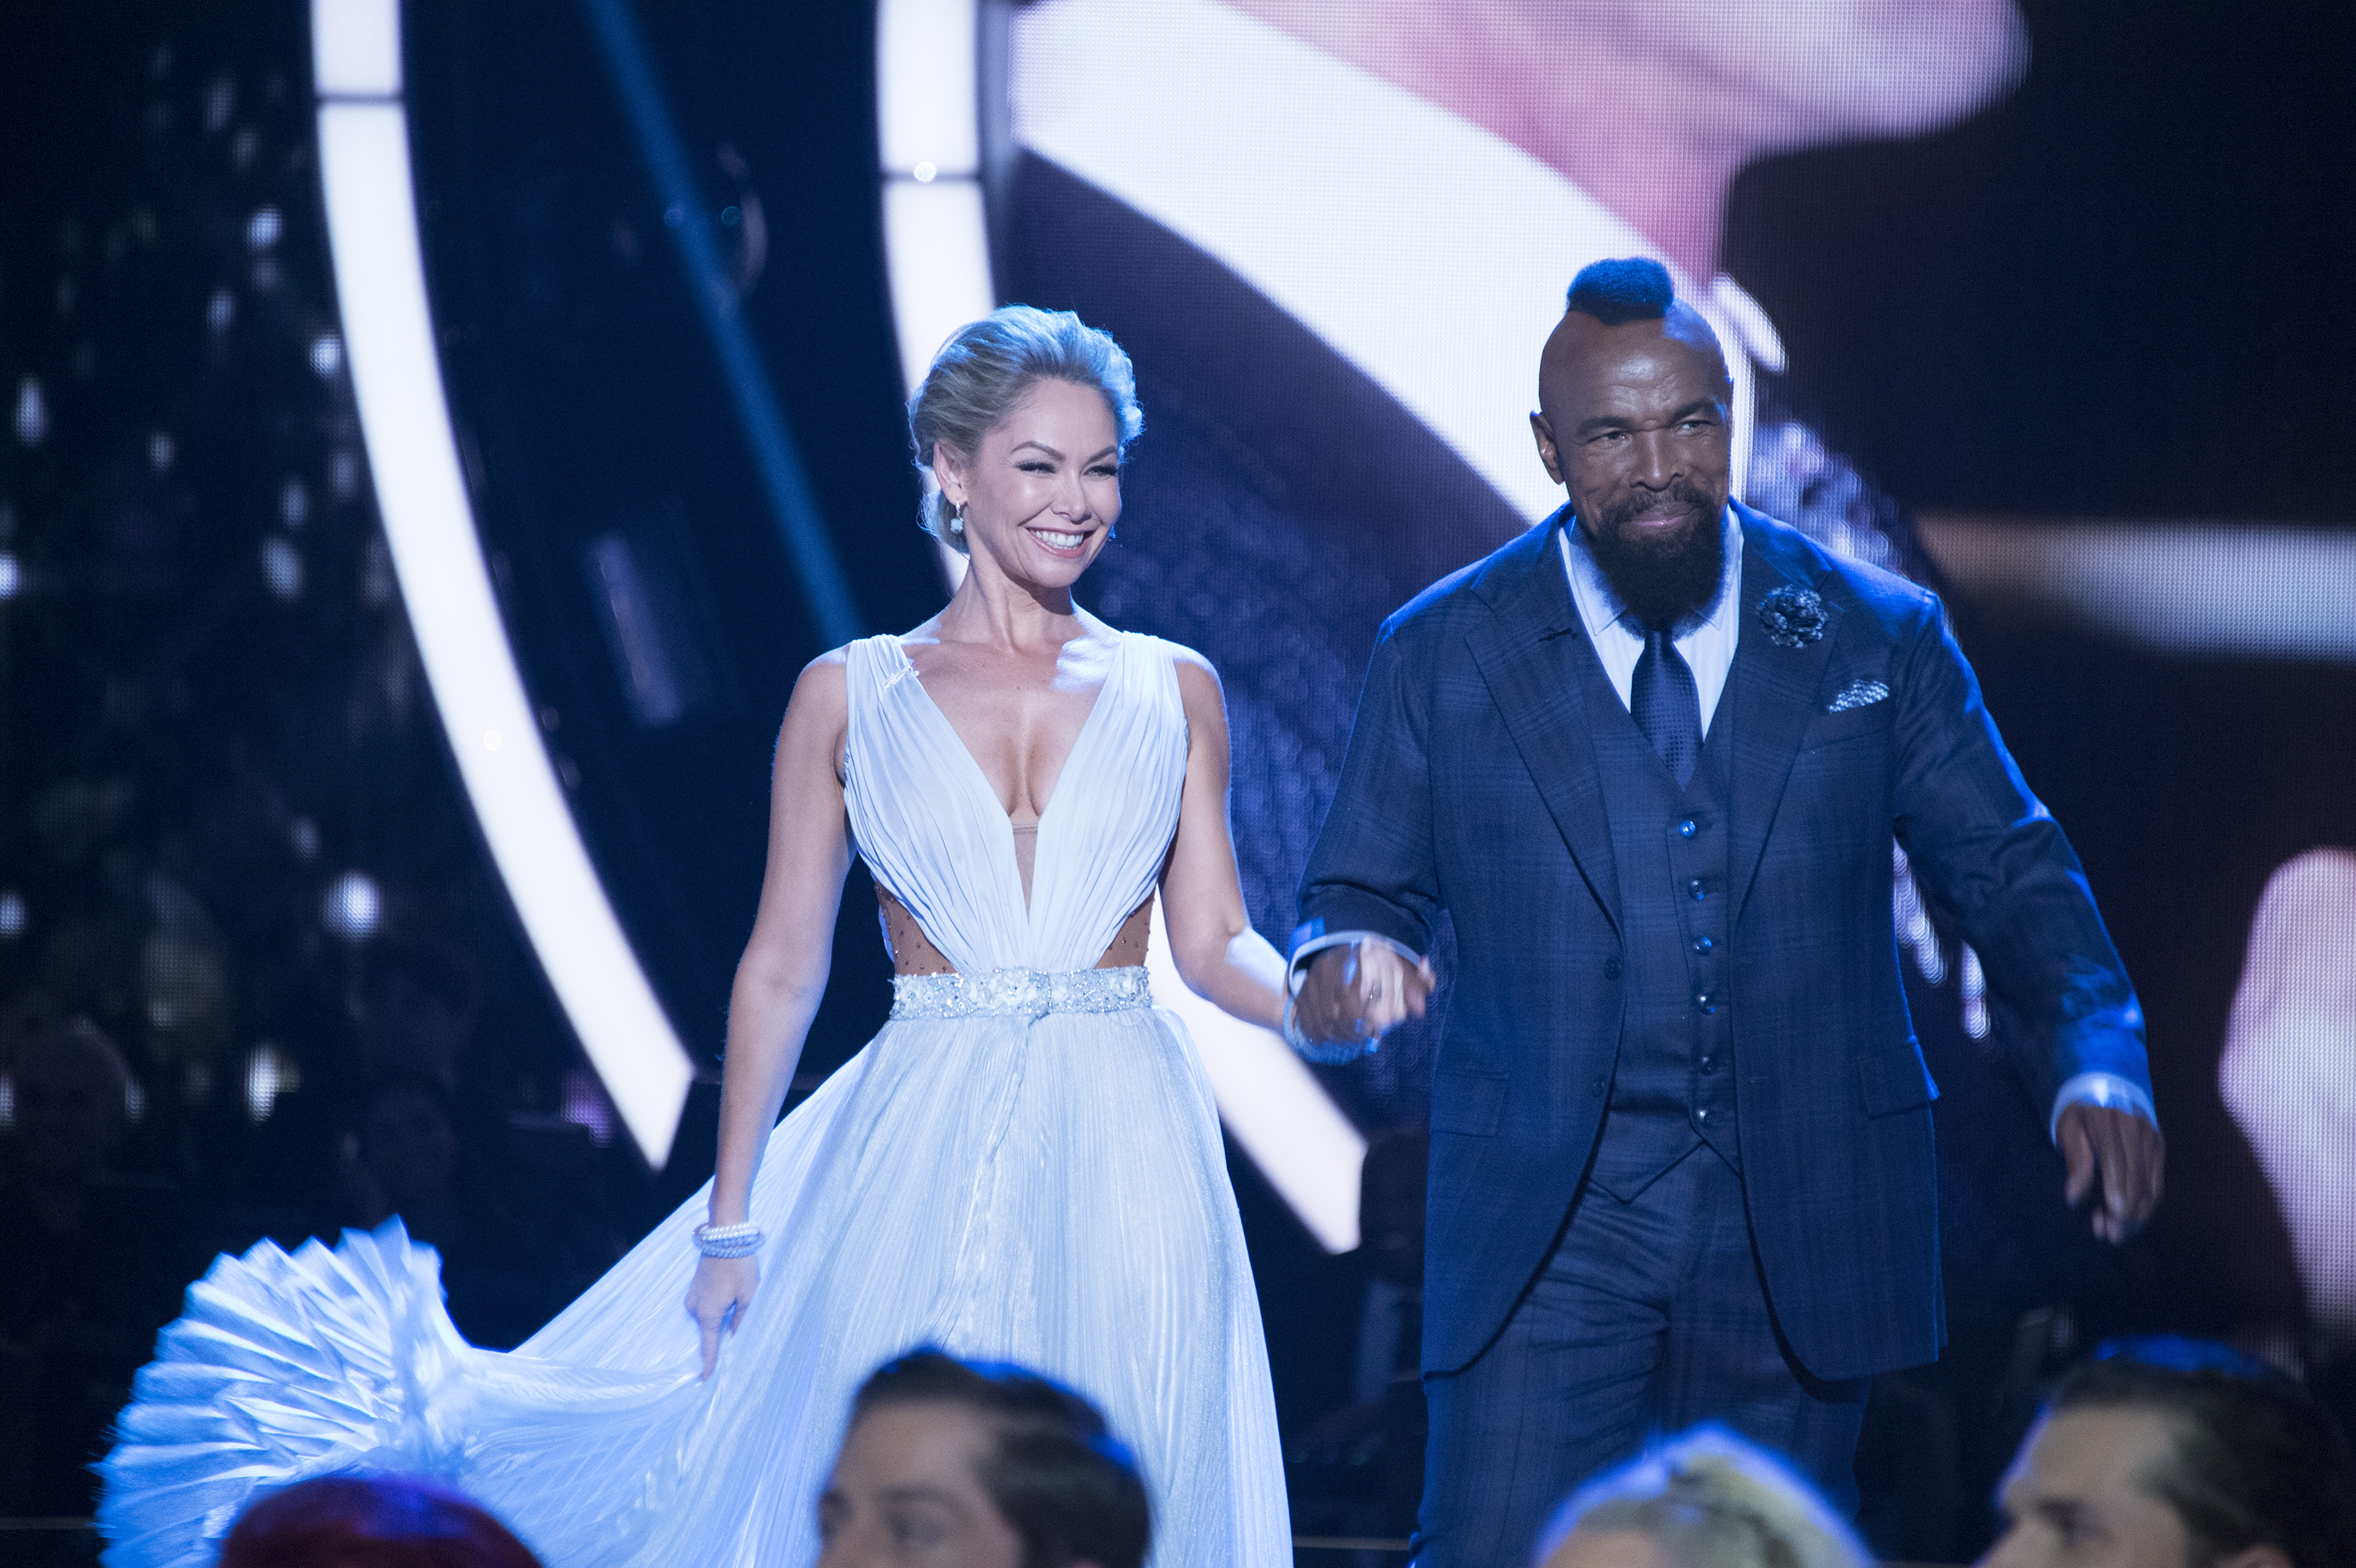 Mr. T and Kym Herjavec during an episode of "Dancing with the Stars" on April 10, 2017. | Source: Getty Images